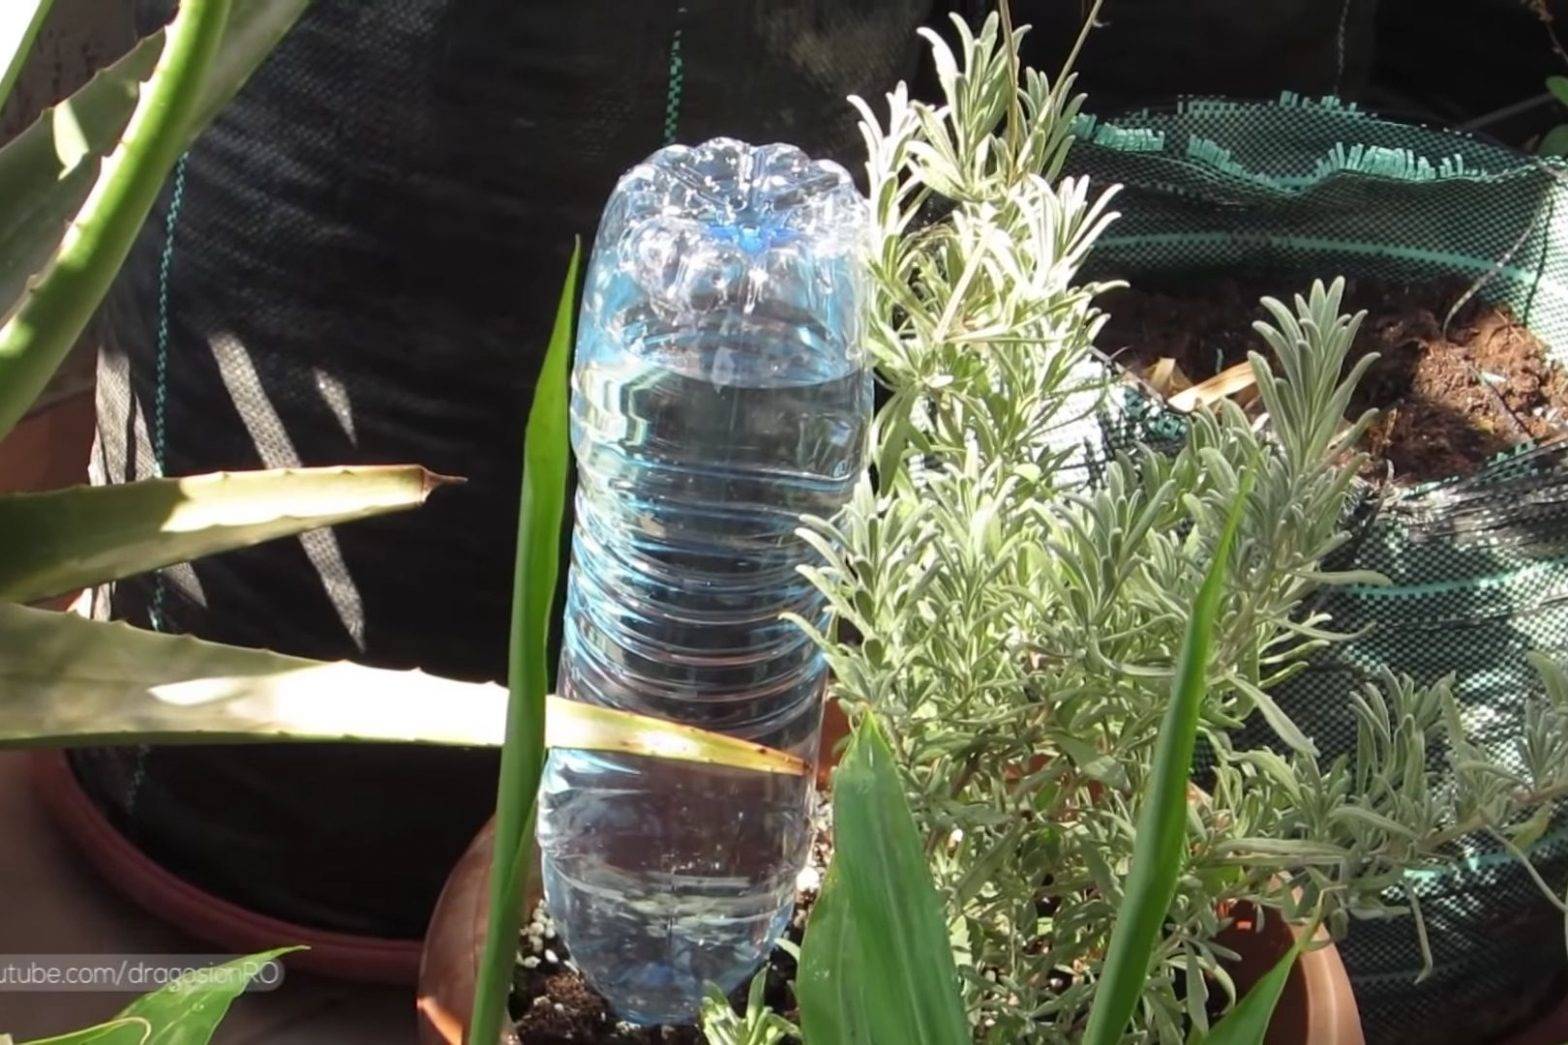 6 Steps To Craft A DIY Automatic Bottle Vegetable Waterer - 113